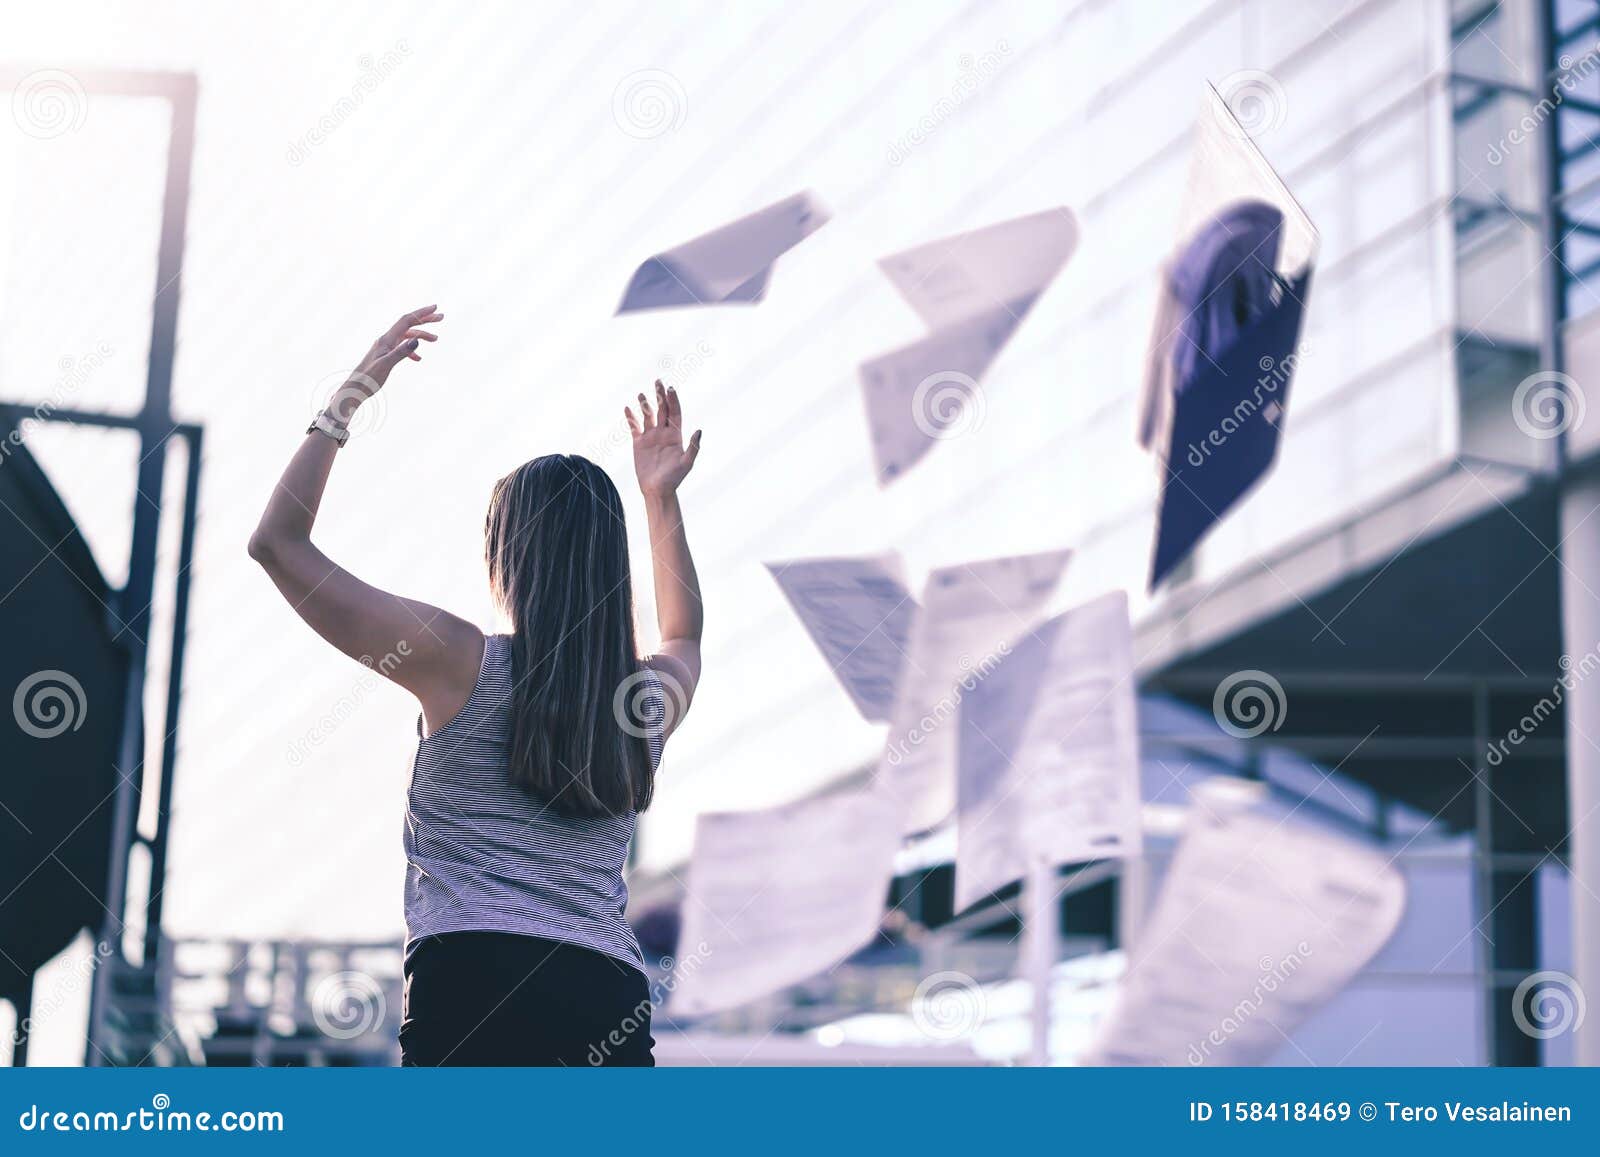 business woman throwing work papers in the air. stress from workload. person going home or leaving for vacation.